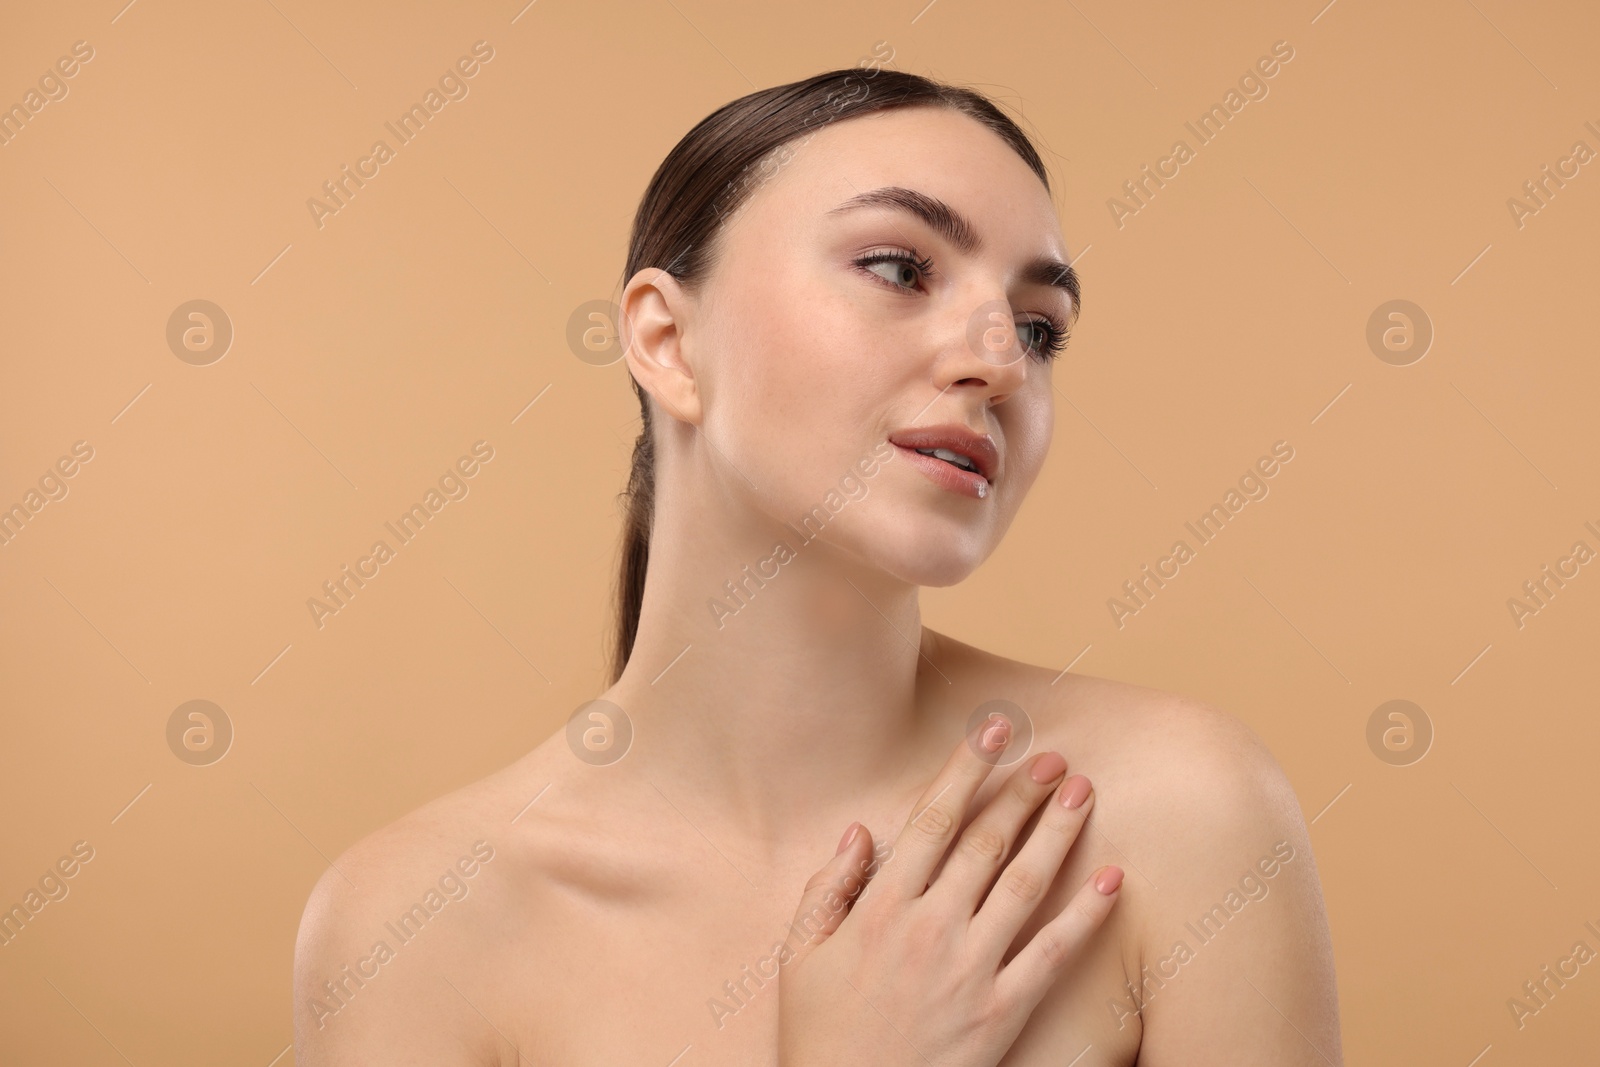 Photo of Portrait of beautiful woman on beige background